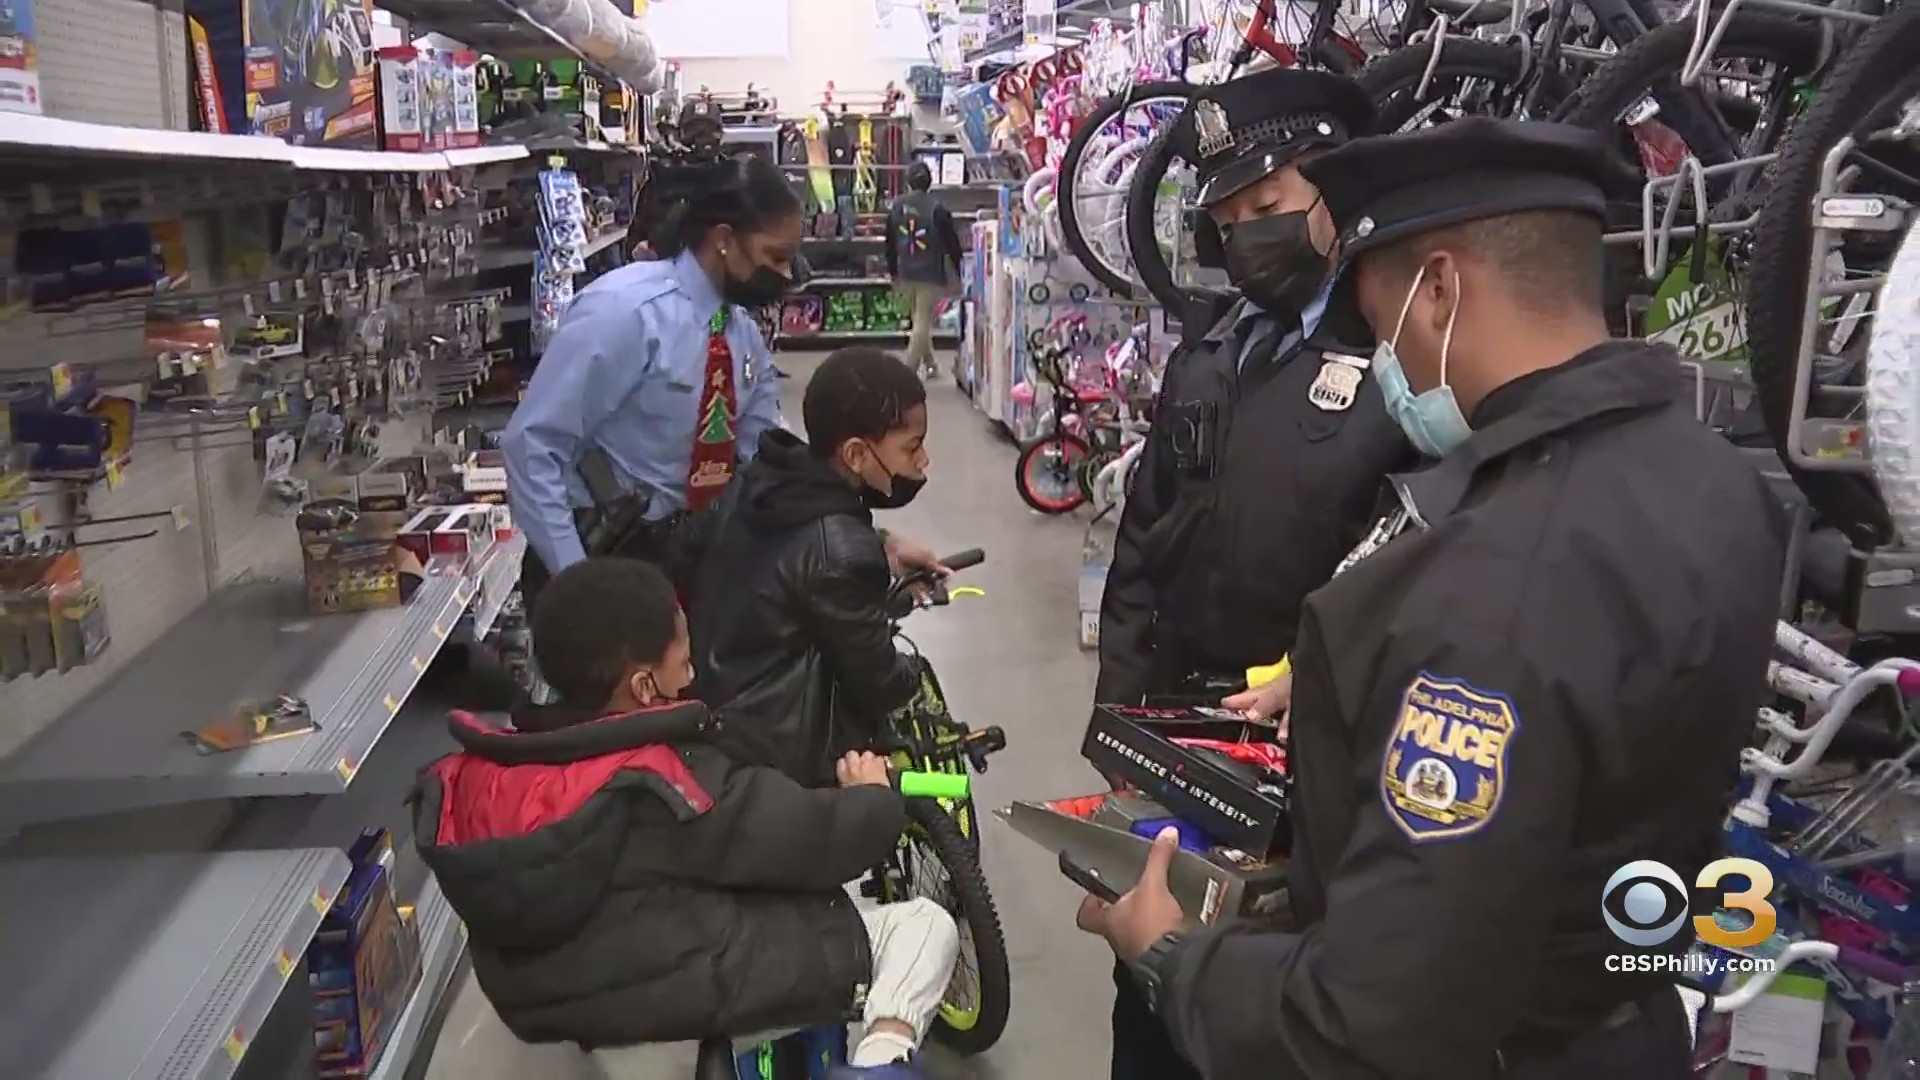 Philadelphia Police Department Holds Shop With A Cop Event To Bring Gifts To Children, Families